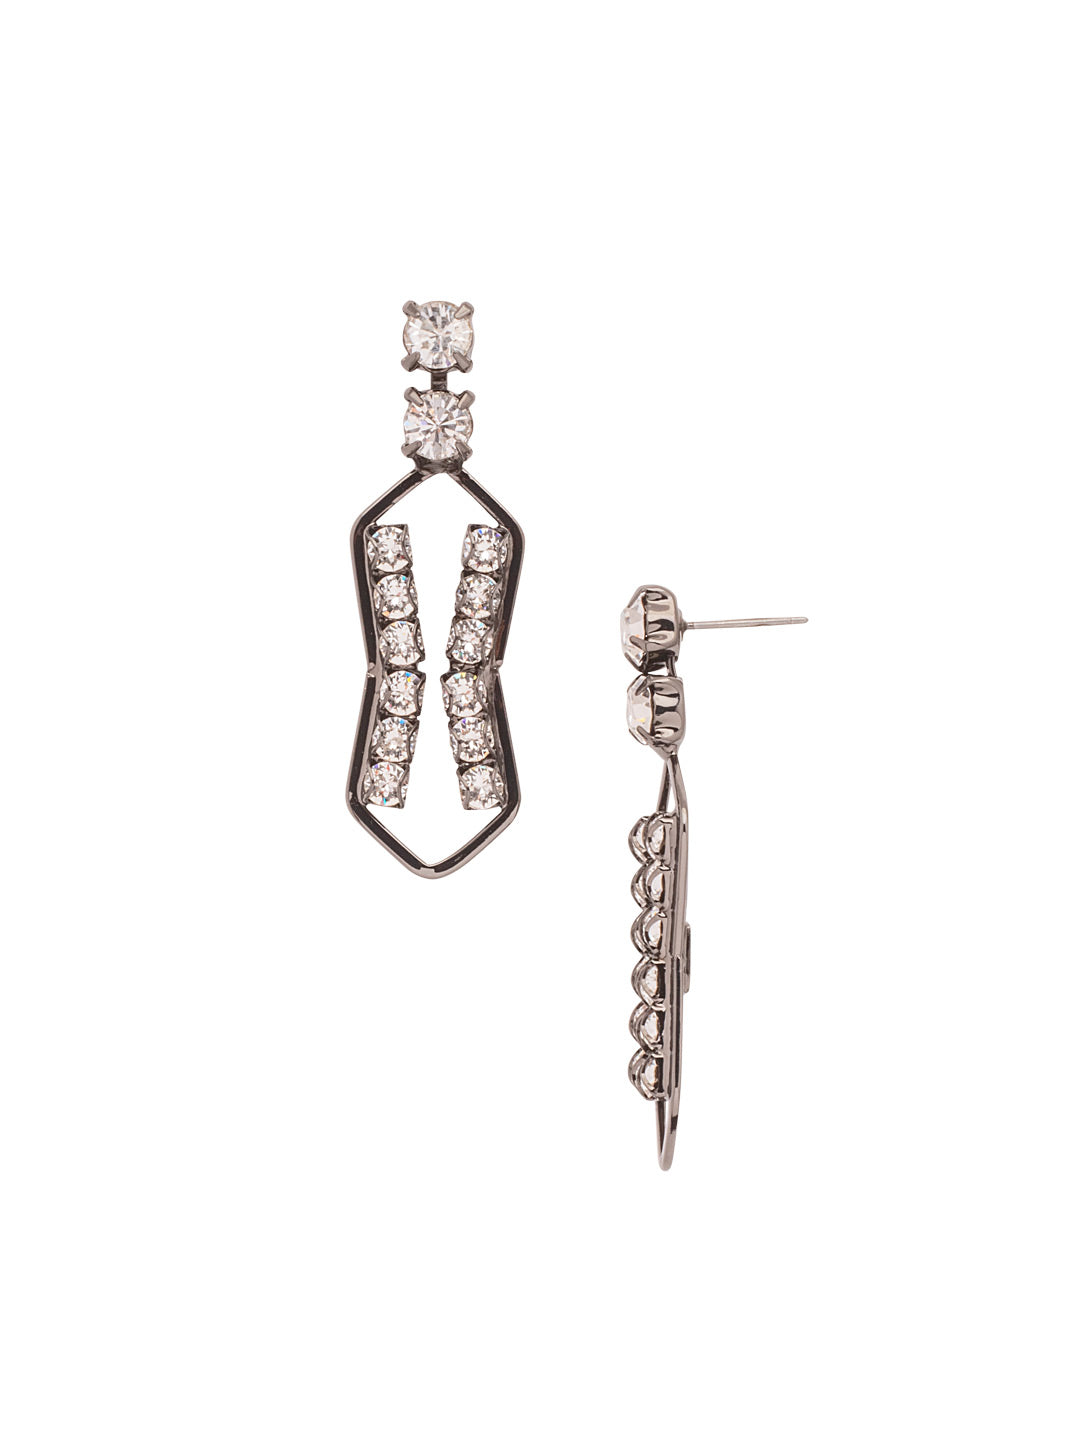 Roslyn Embellished Dangle Earring - 4EEZ62GMCRY - <p>The Roslyn Embellished Dangle Earrings feature two repeating crystals on a post. Hanging from the crystals is an hourglass shaped metal hoop with two lines of crystals inside on each side. From Sorrelli's Crystal collection in our Gun Metal finish.</p>